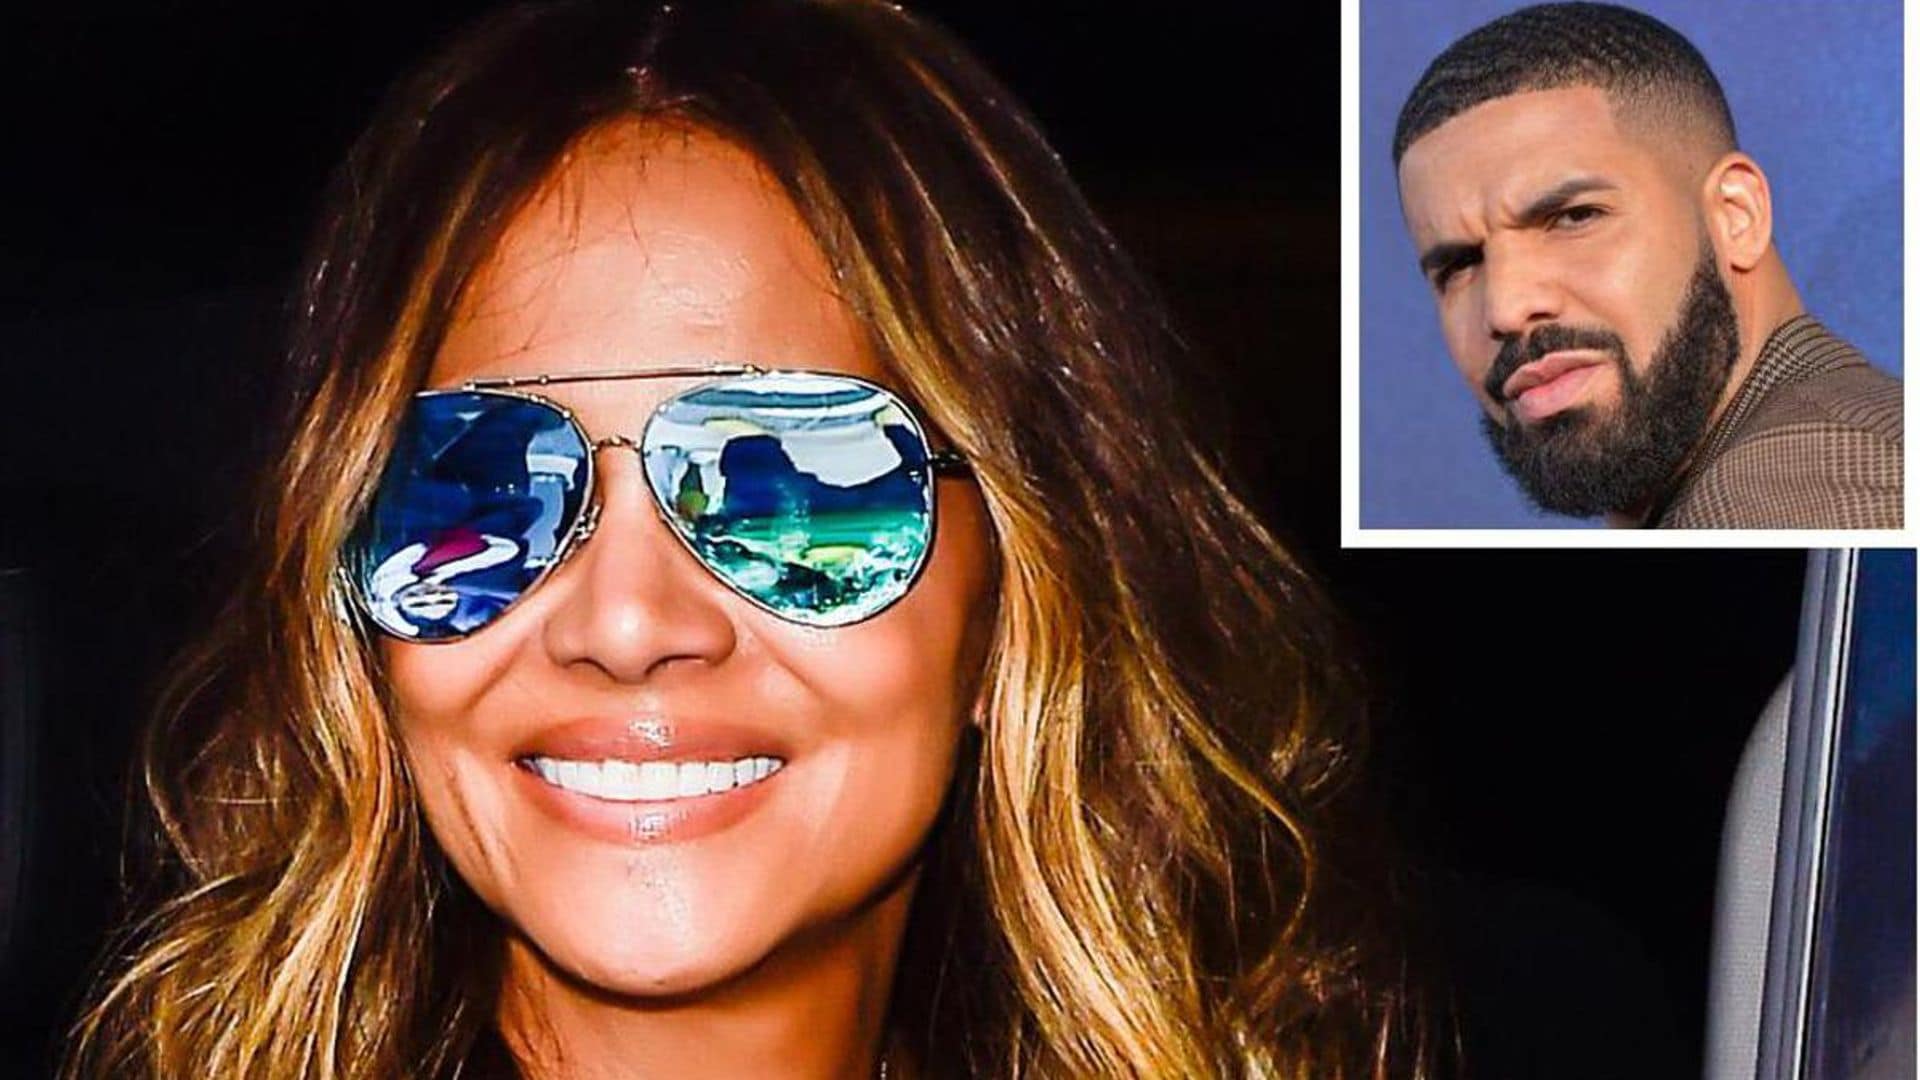 Halle Berry is all smiles in New York after calling out Drake for using her image without permission